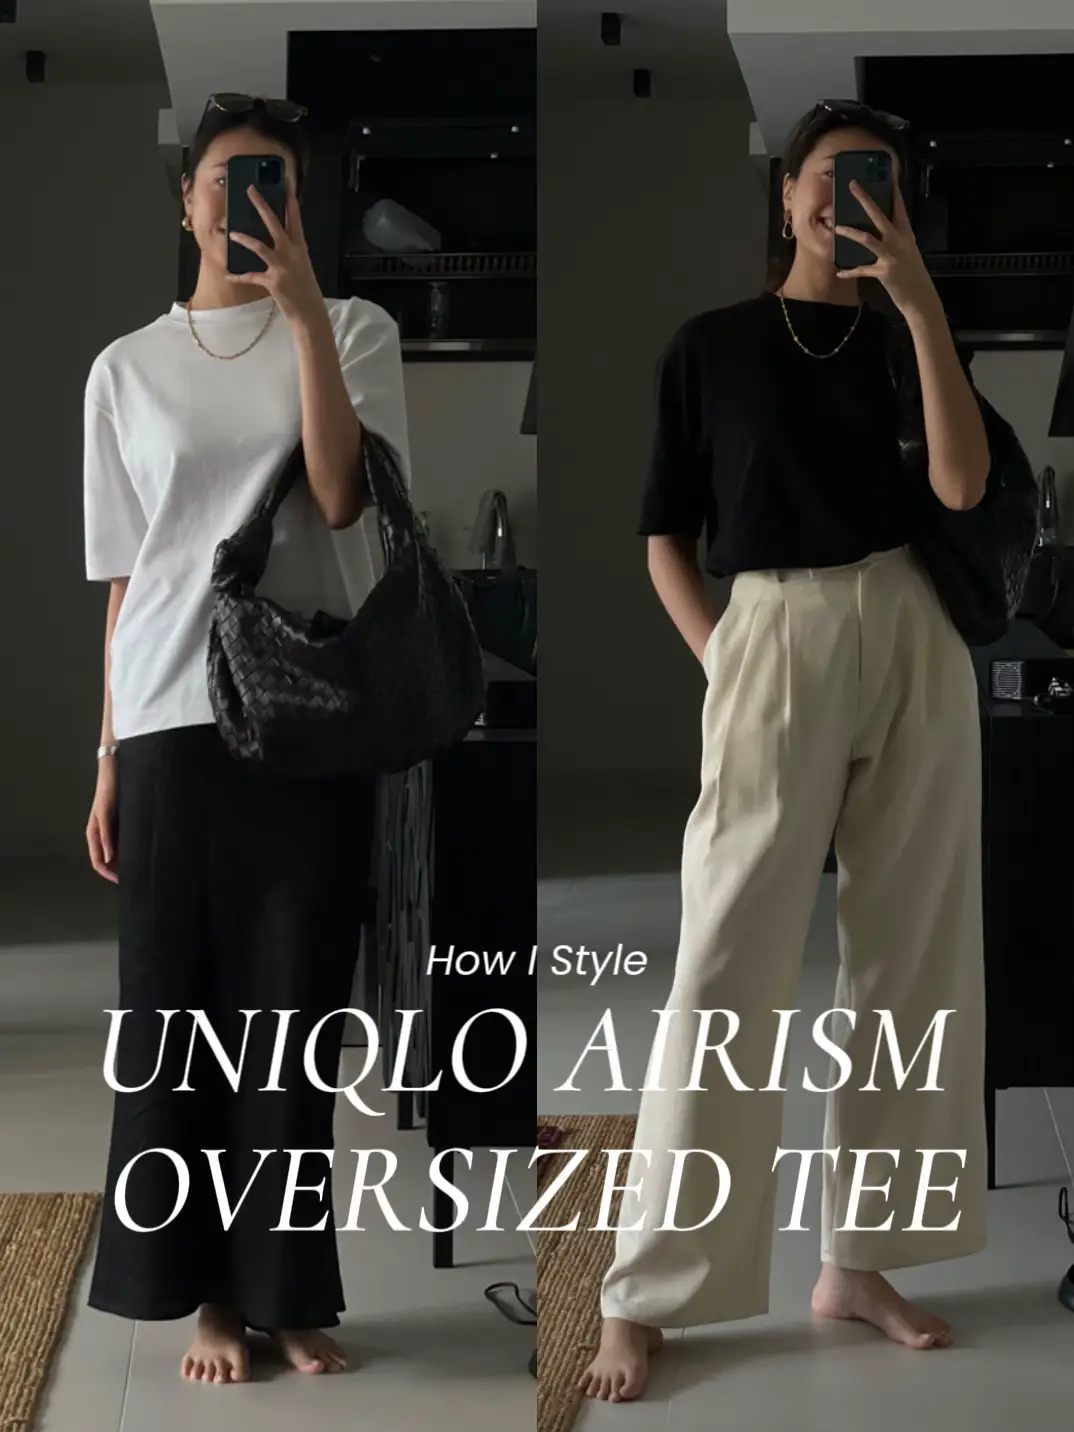 Check styling ideas for「AIRism Regular Collar Polo Shirt、AirSense Relaxed  Pants (Ultra Light Relaxed Pants)」